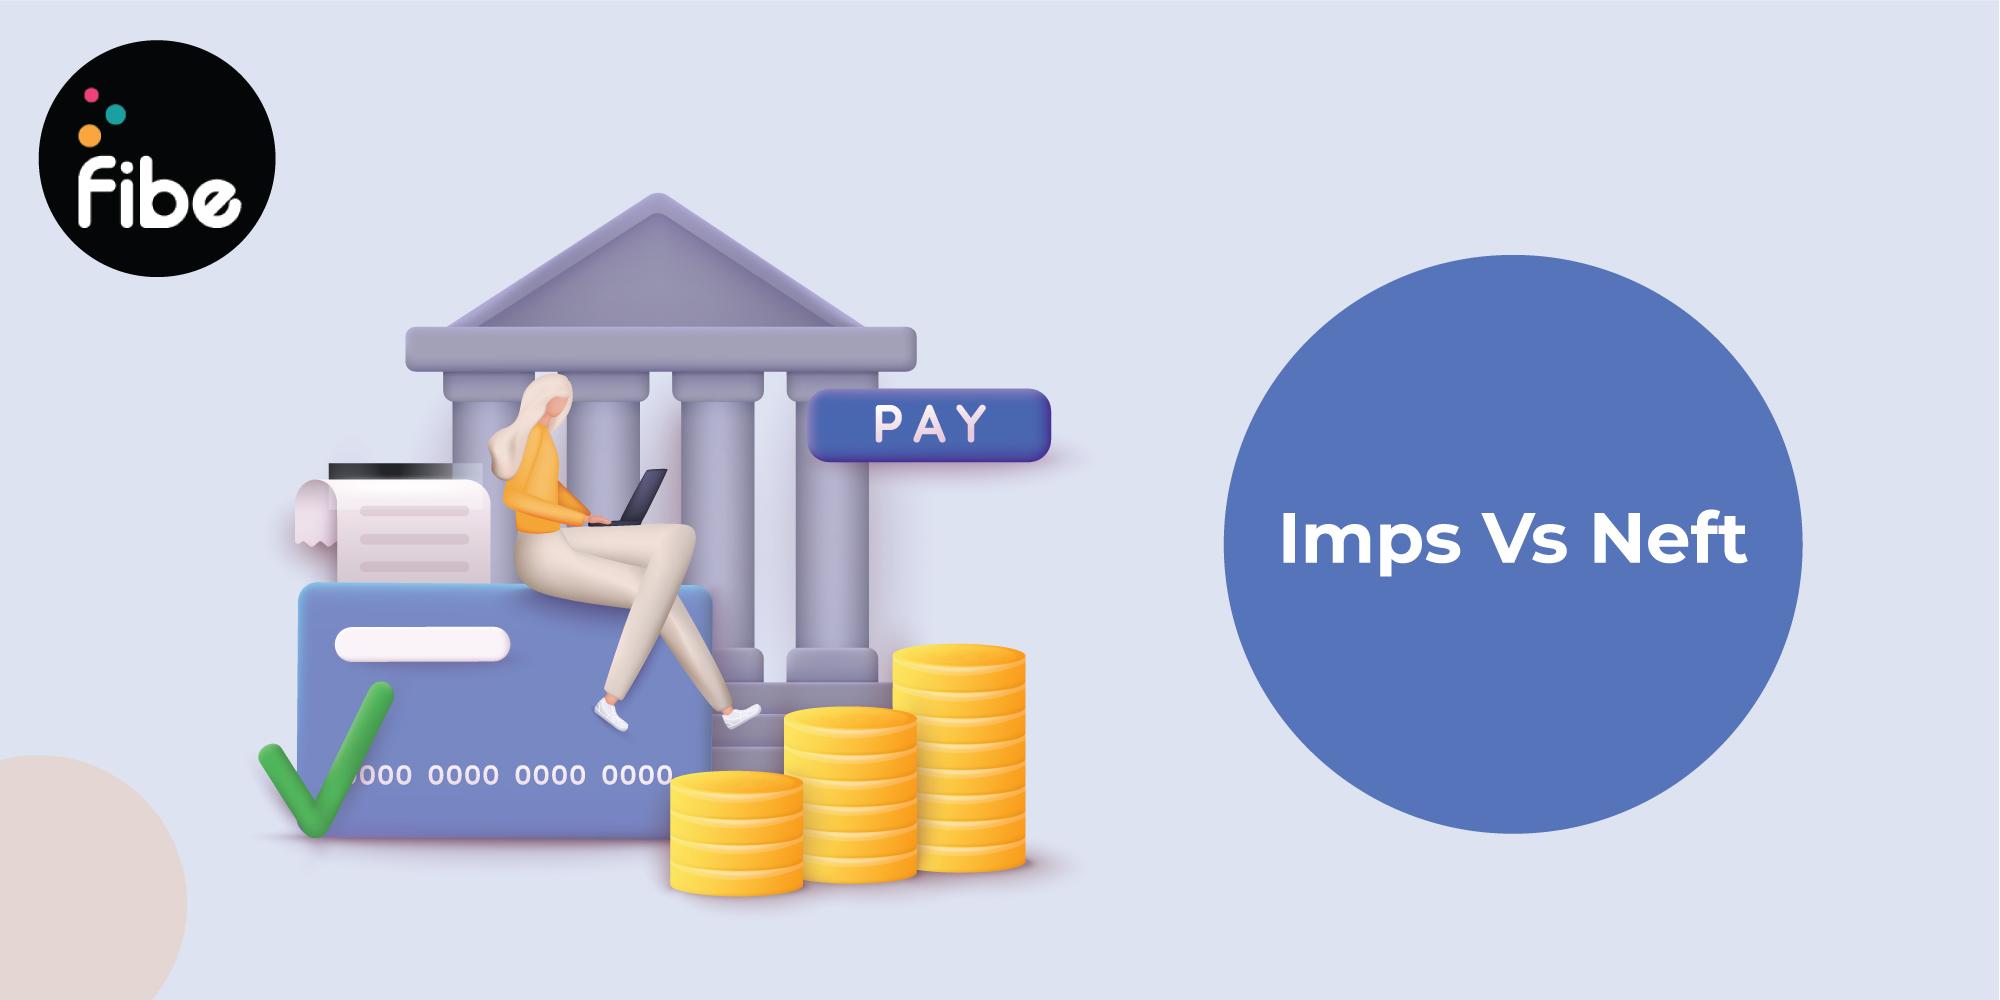 IMPS vs NEFT: Full form, differences, charges and more